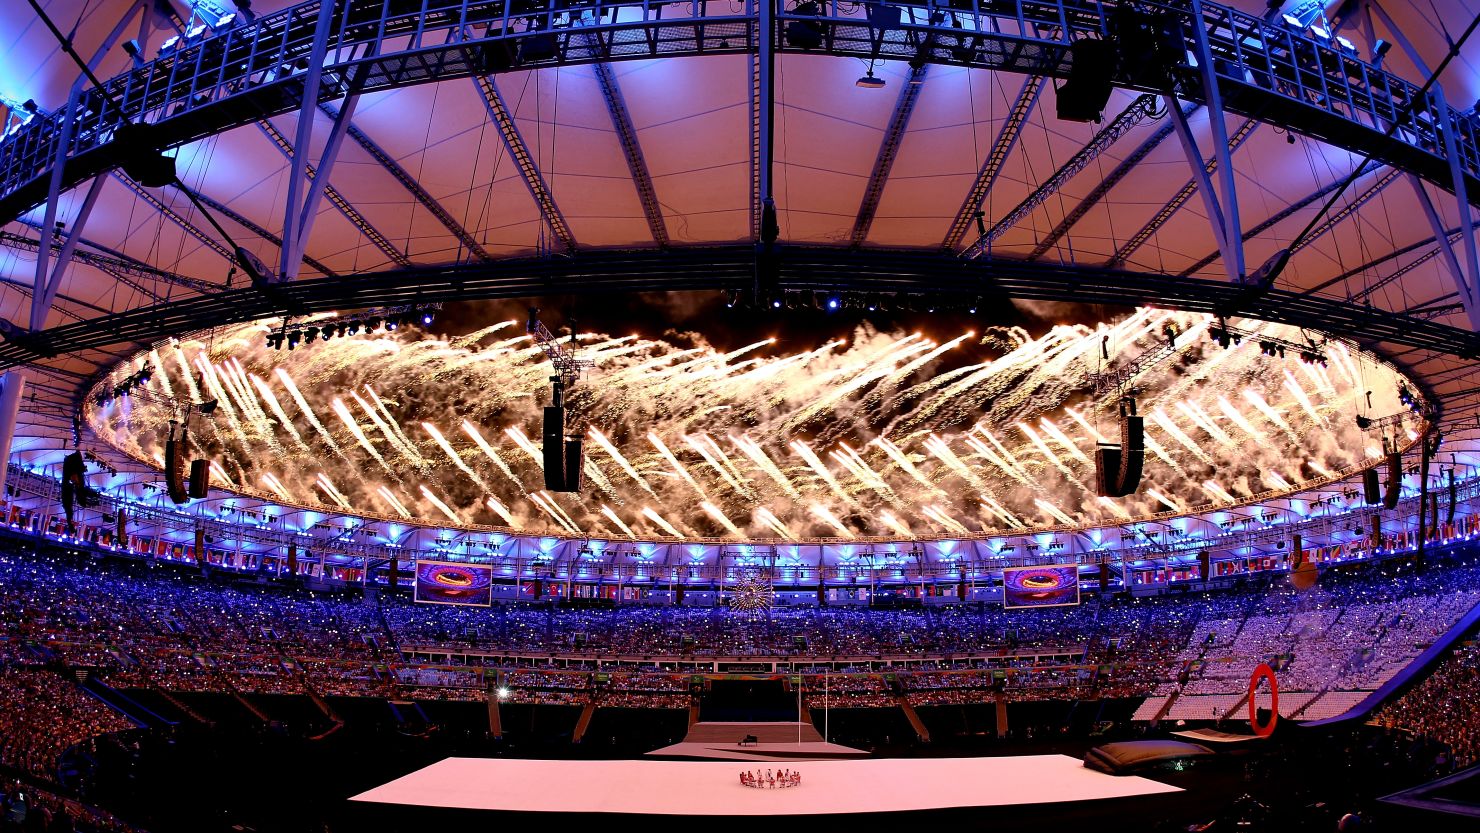 The Paralympic Games got under way against a backdrop of color and samba.